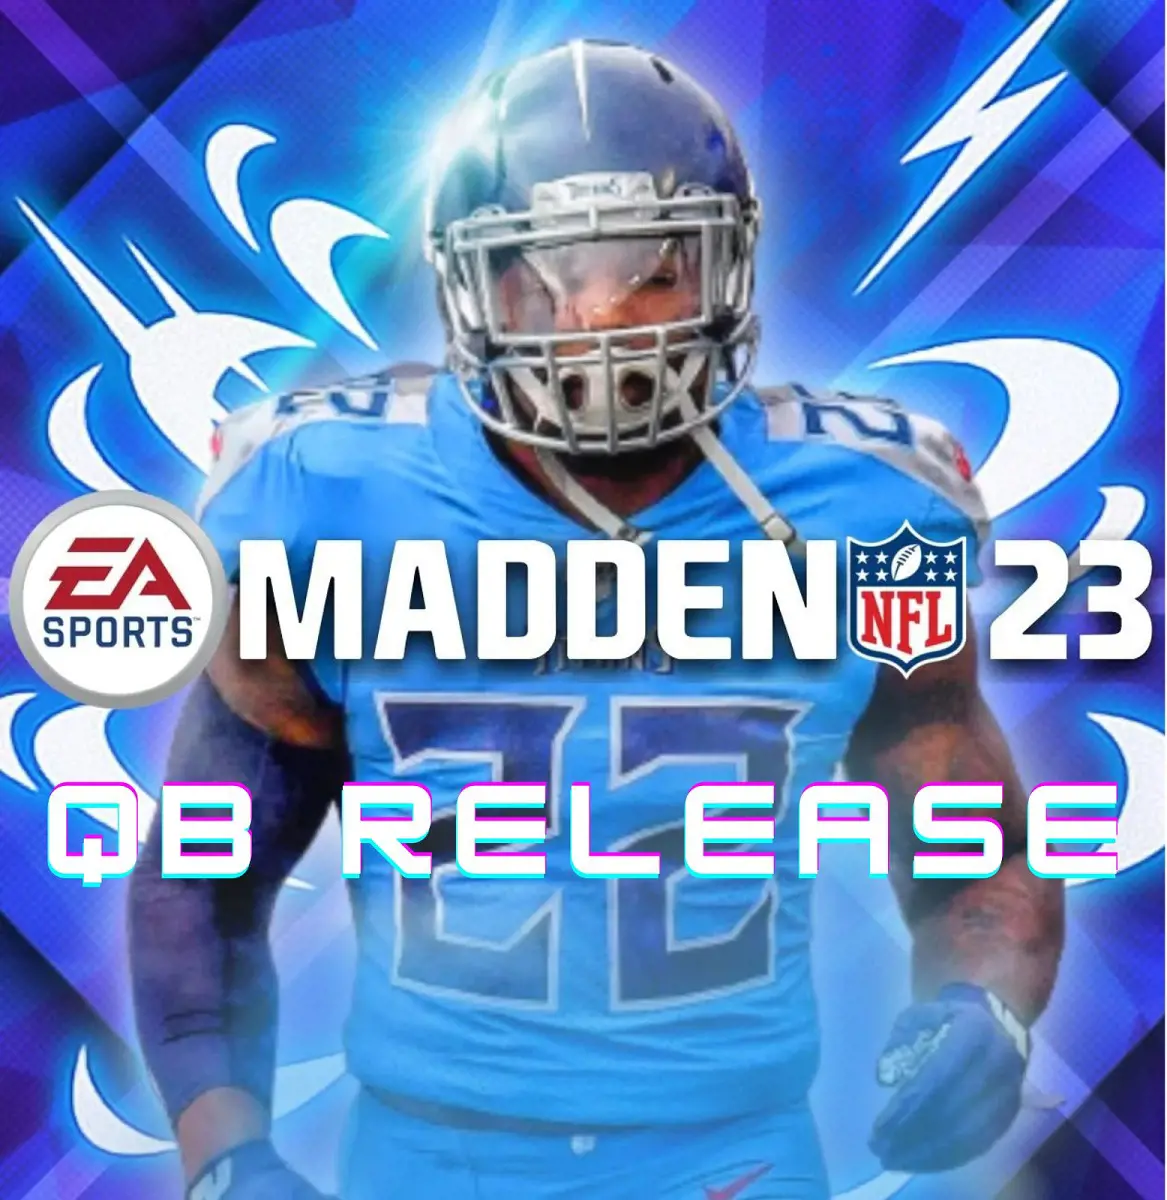 Chiefs Edition cover of the popular NFL video game. (unofficial)